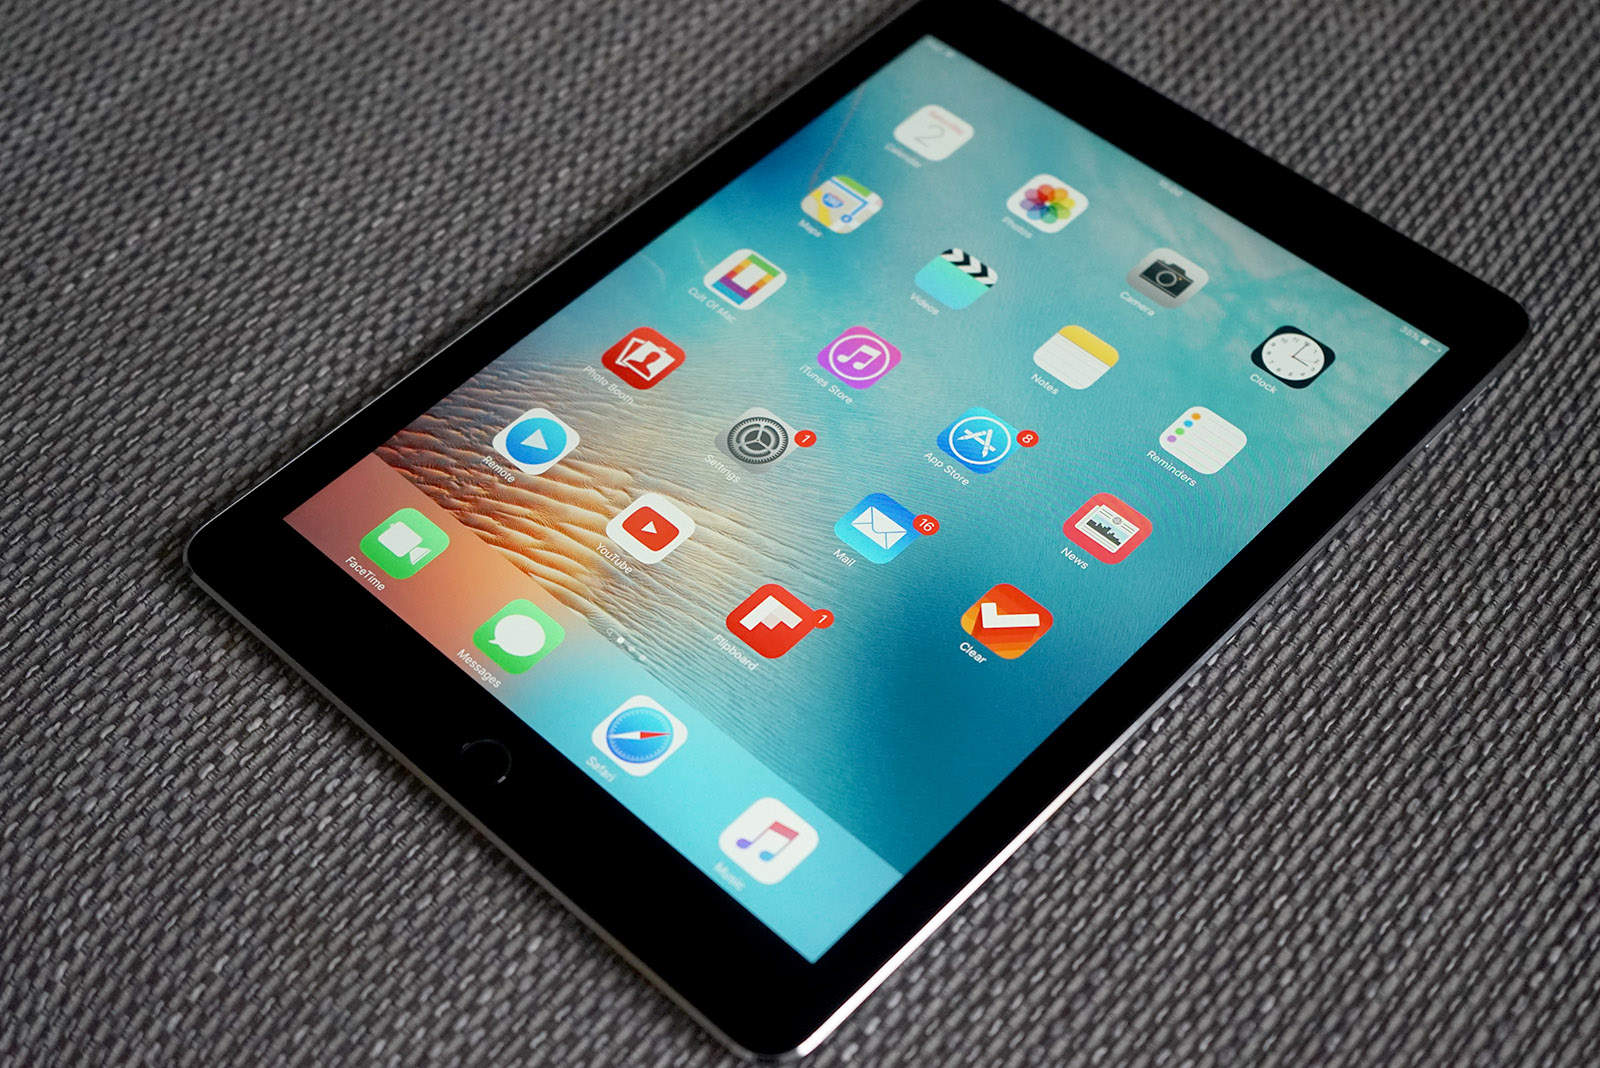 iPad Pro is getting outsold by Apple’s cheaper tablets | Cult of Mac